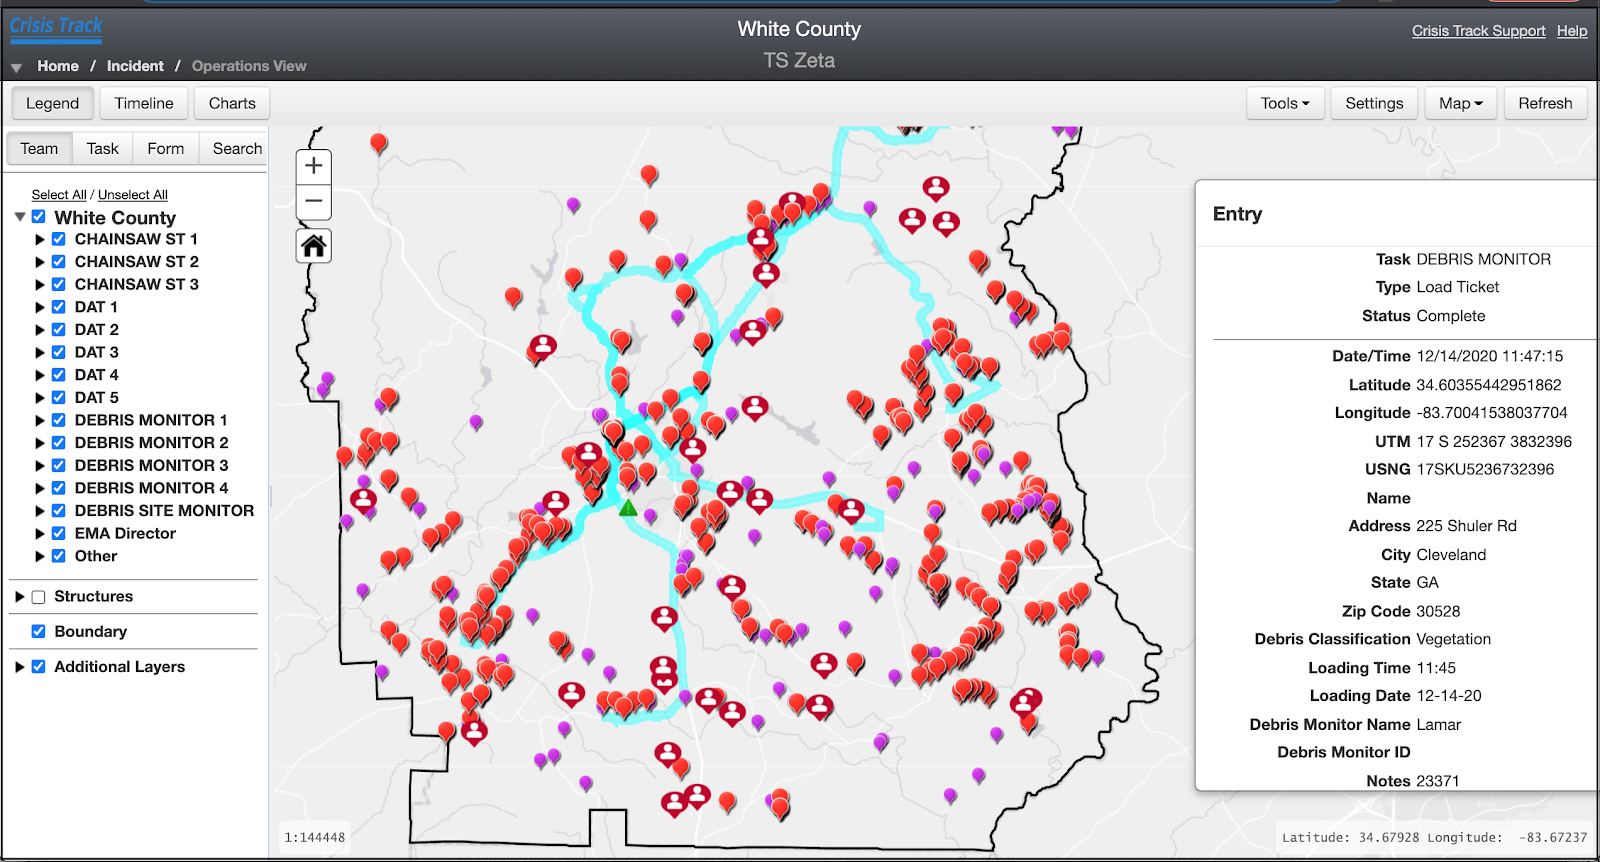 Operations View of White County, GA in Crisis Track